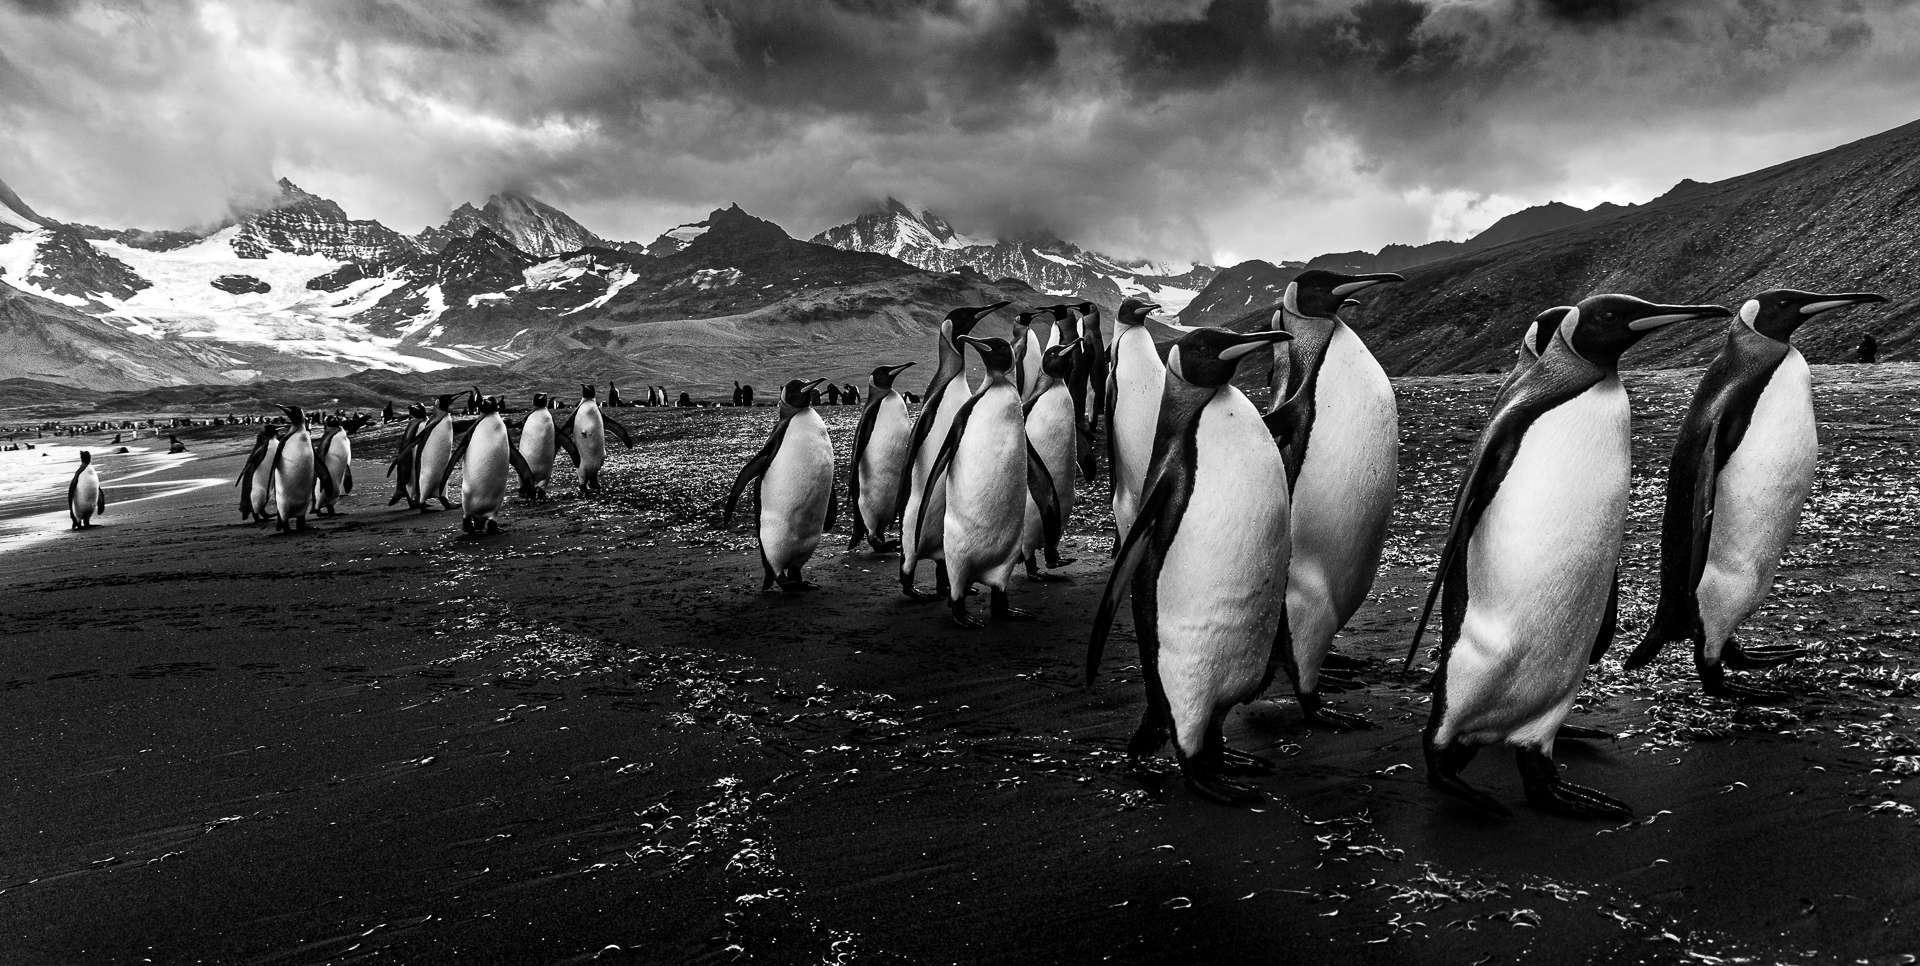 March of the Penguins...